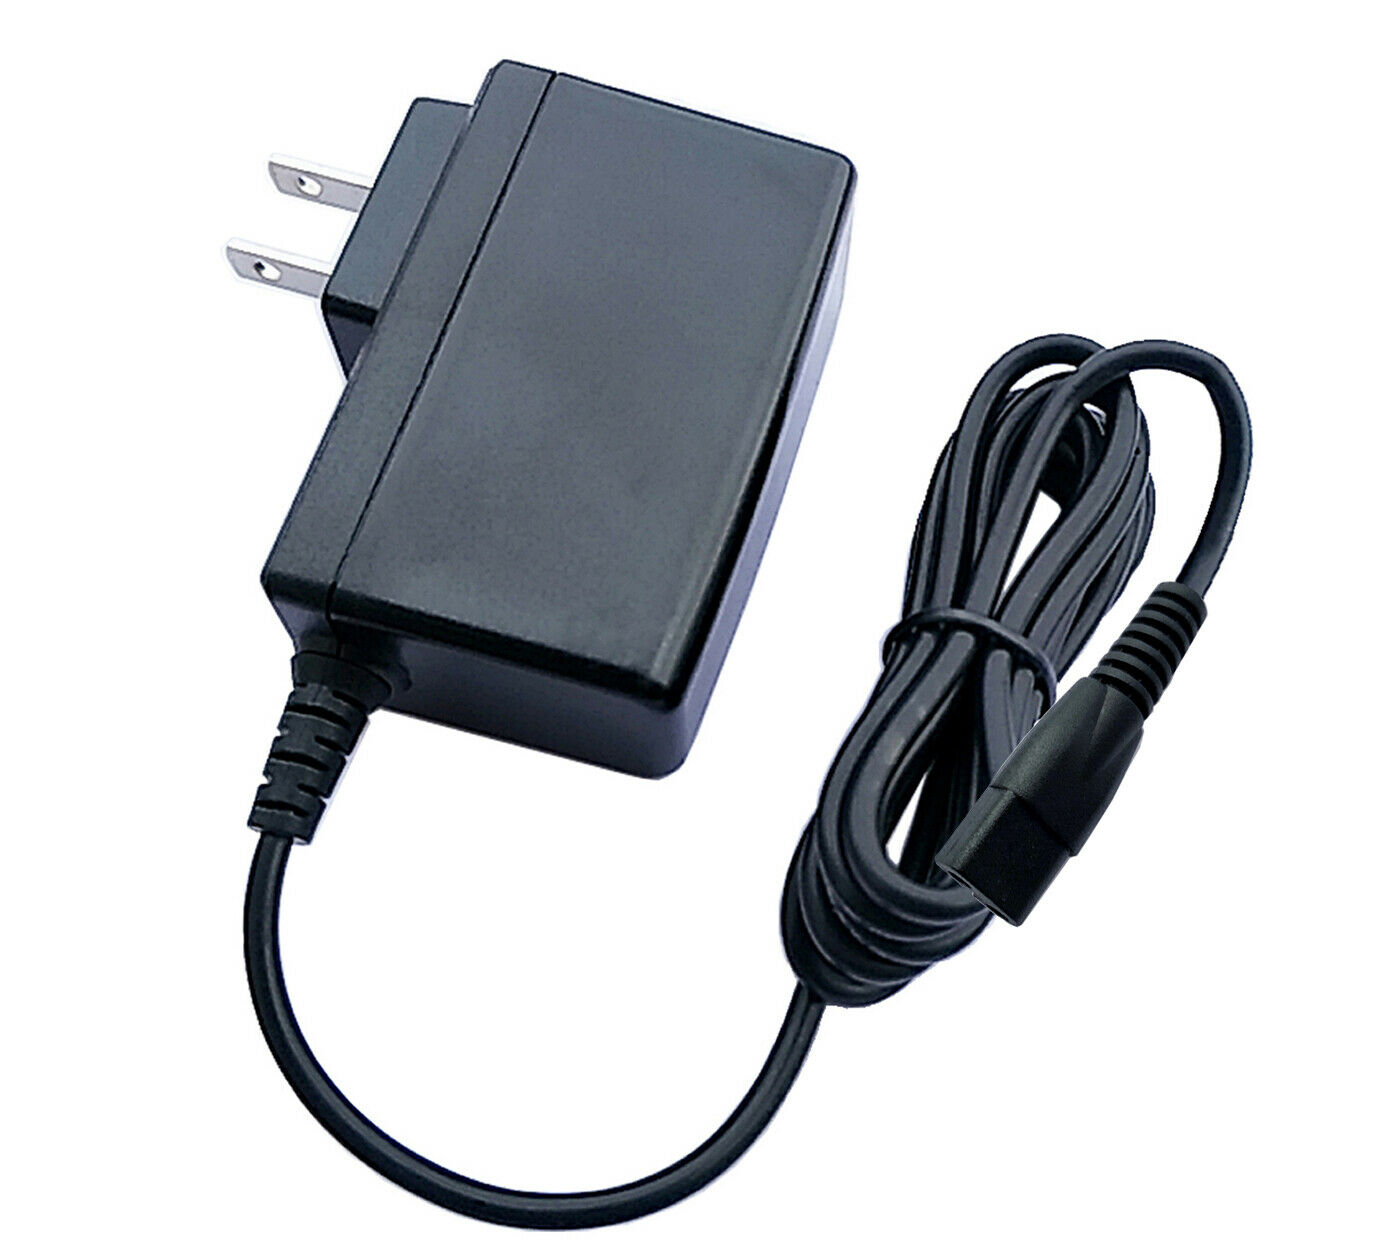 AC/DC Adapter For Coleman Obsolete 19.2V 24V Power Supply Cord Battery Charger Technical Specifications: 1 AC input vo - Click Image to Close